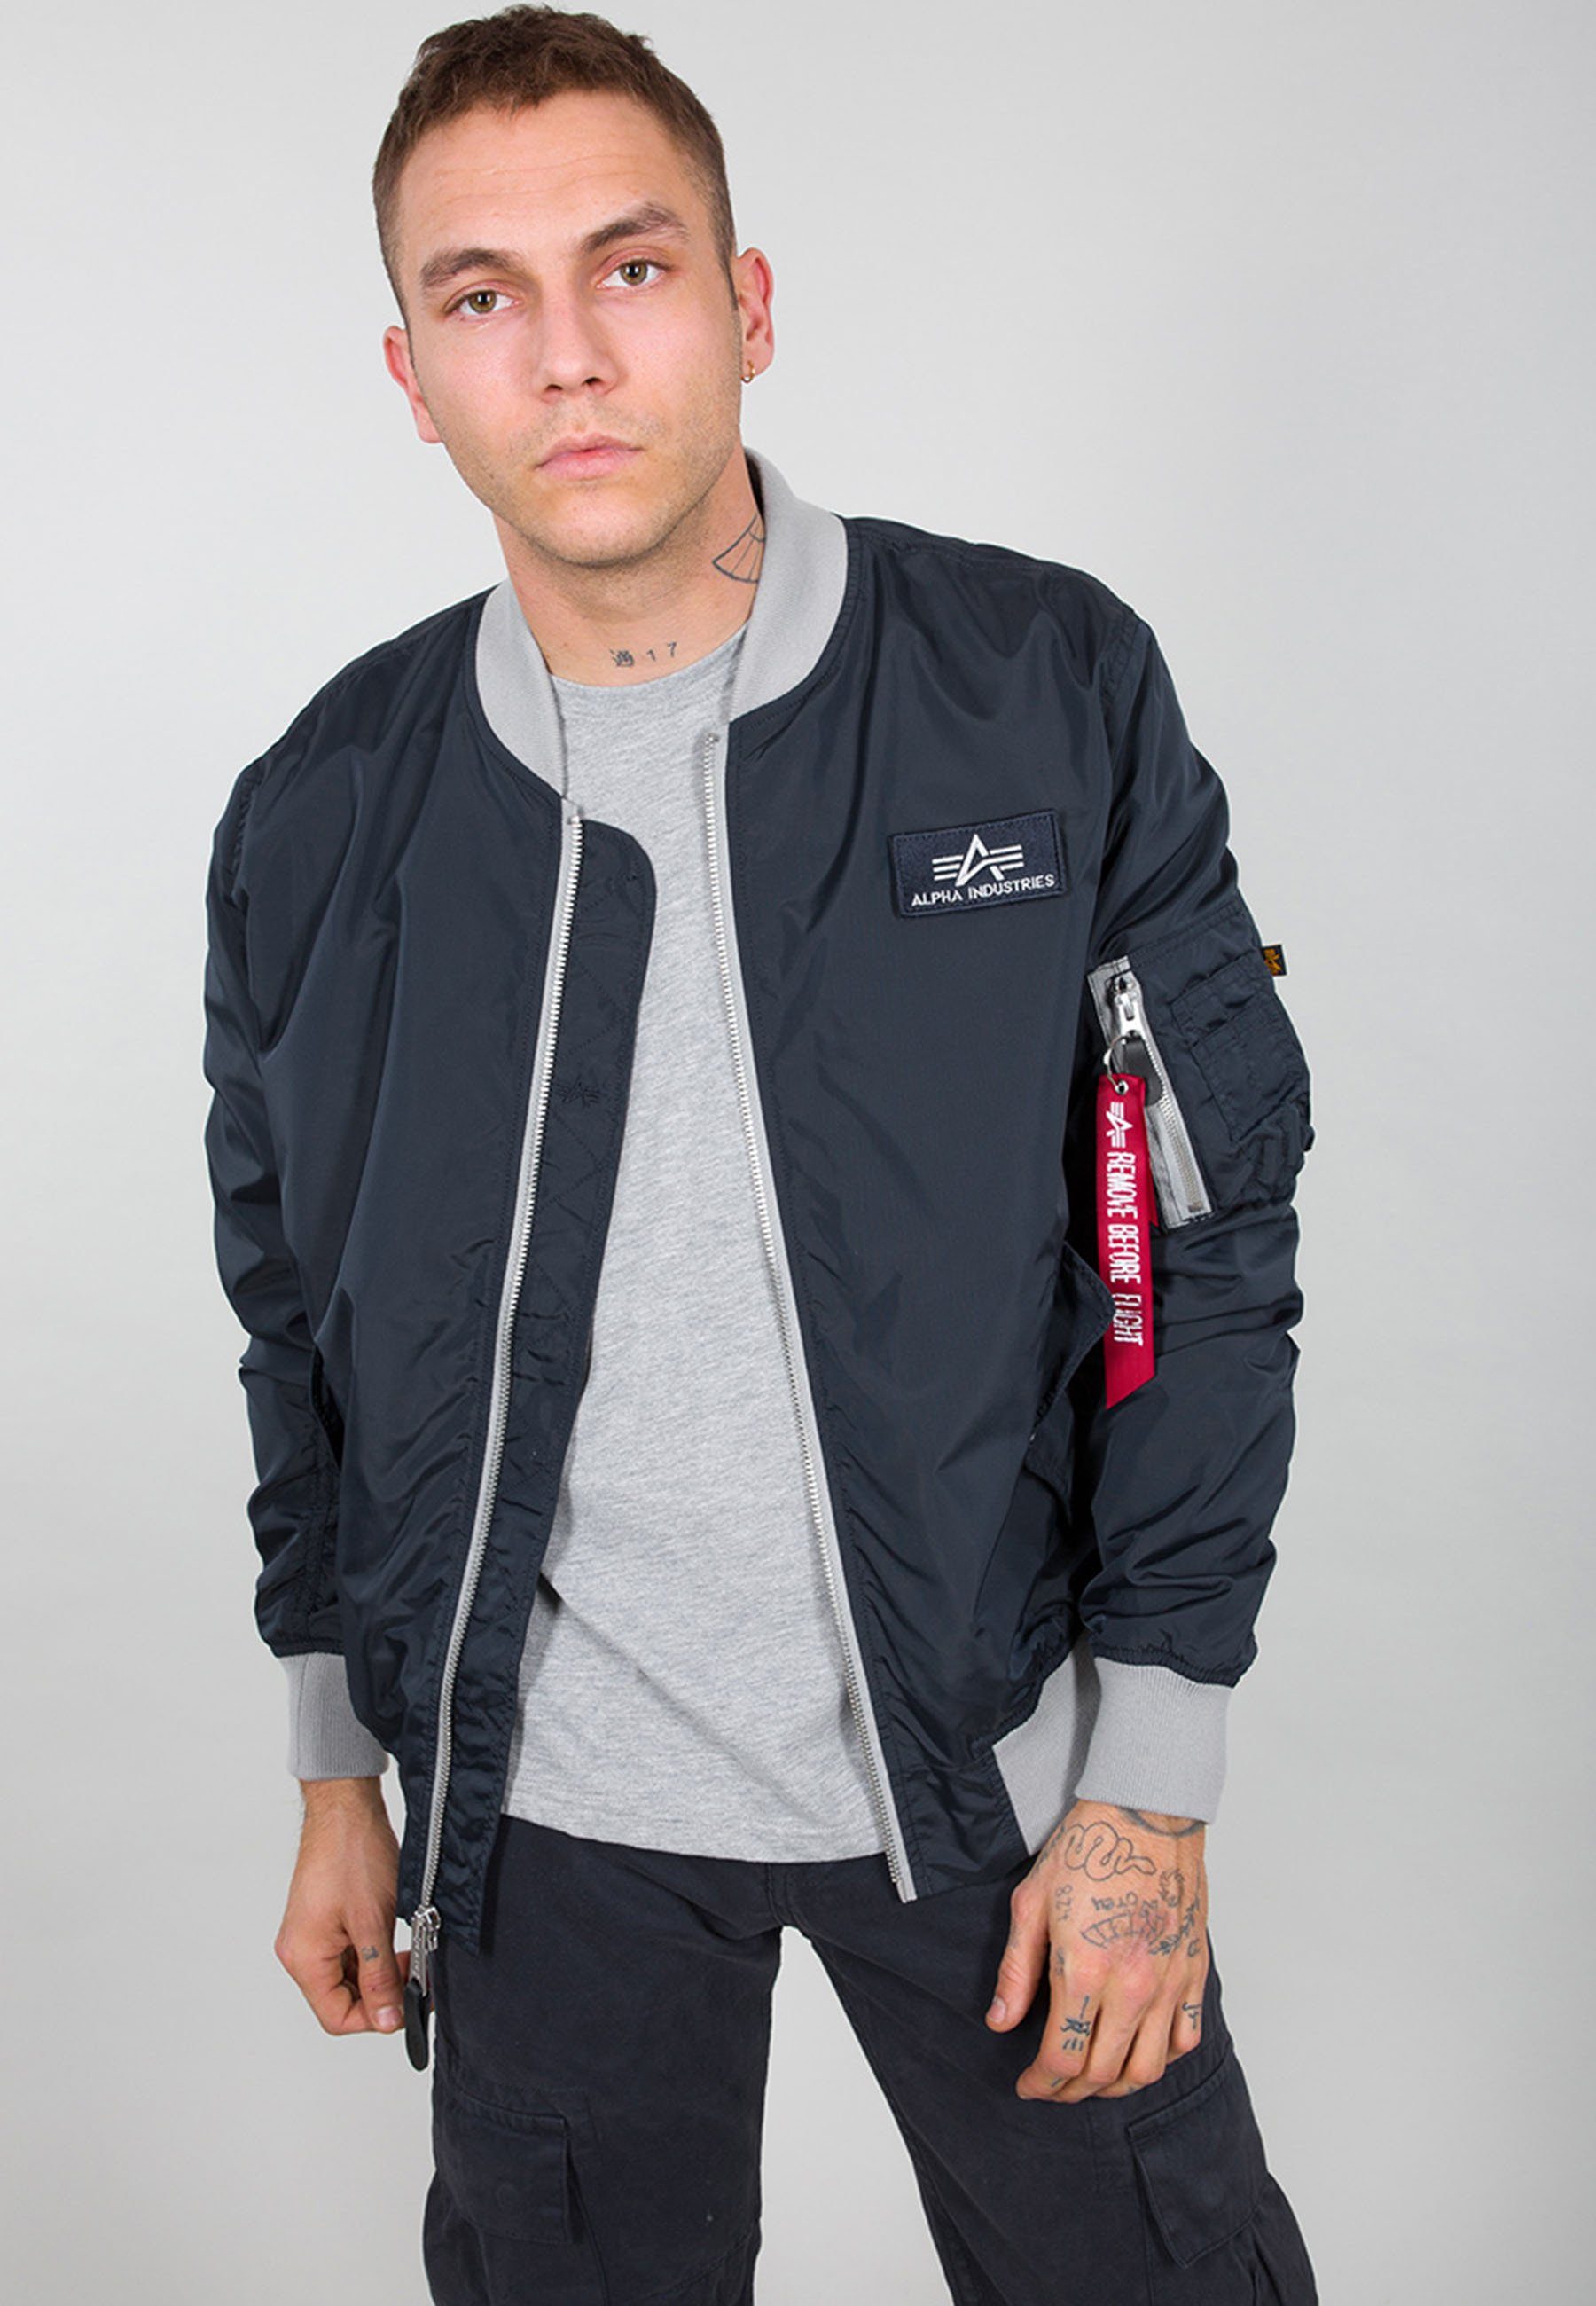 Alpha Industries rep.blue Jackets Bomber Flight Alpha MA-1 Industries TTC - Bomberjacke & Men